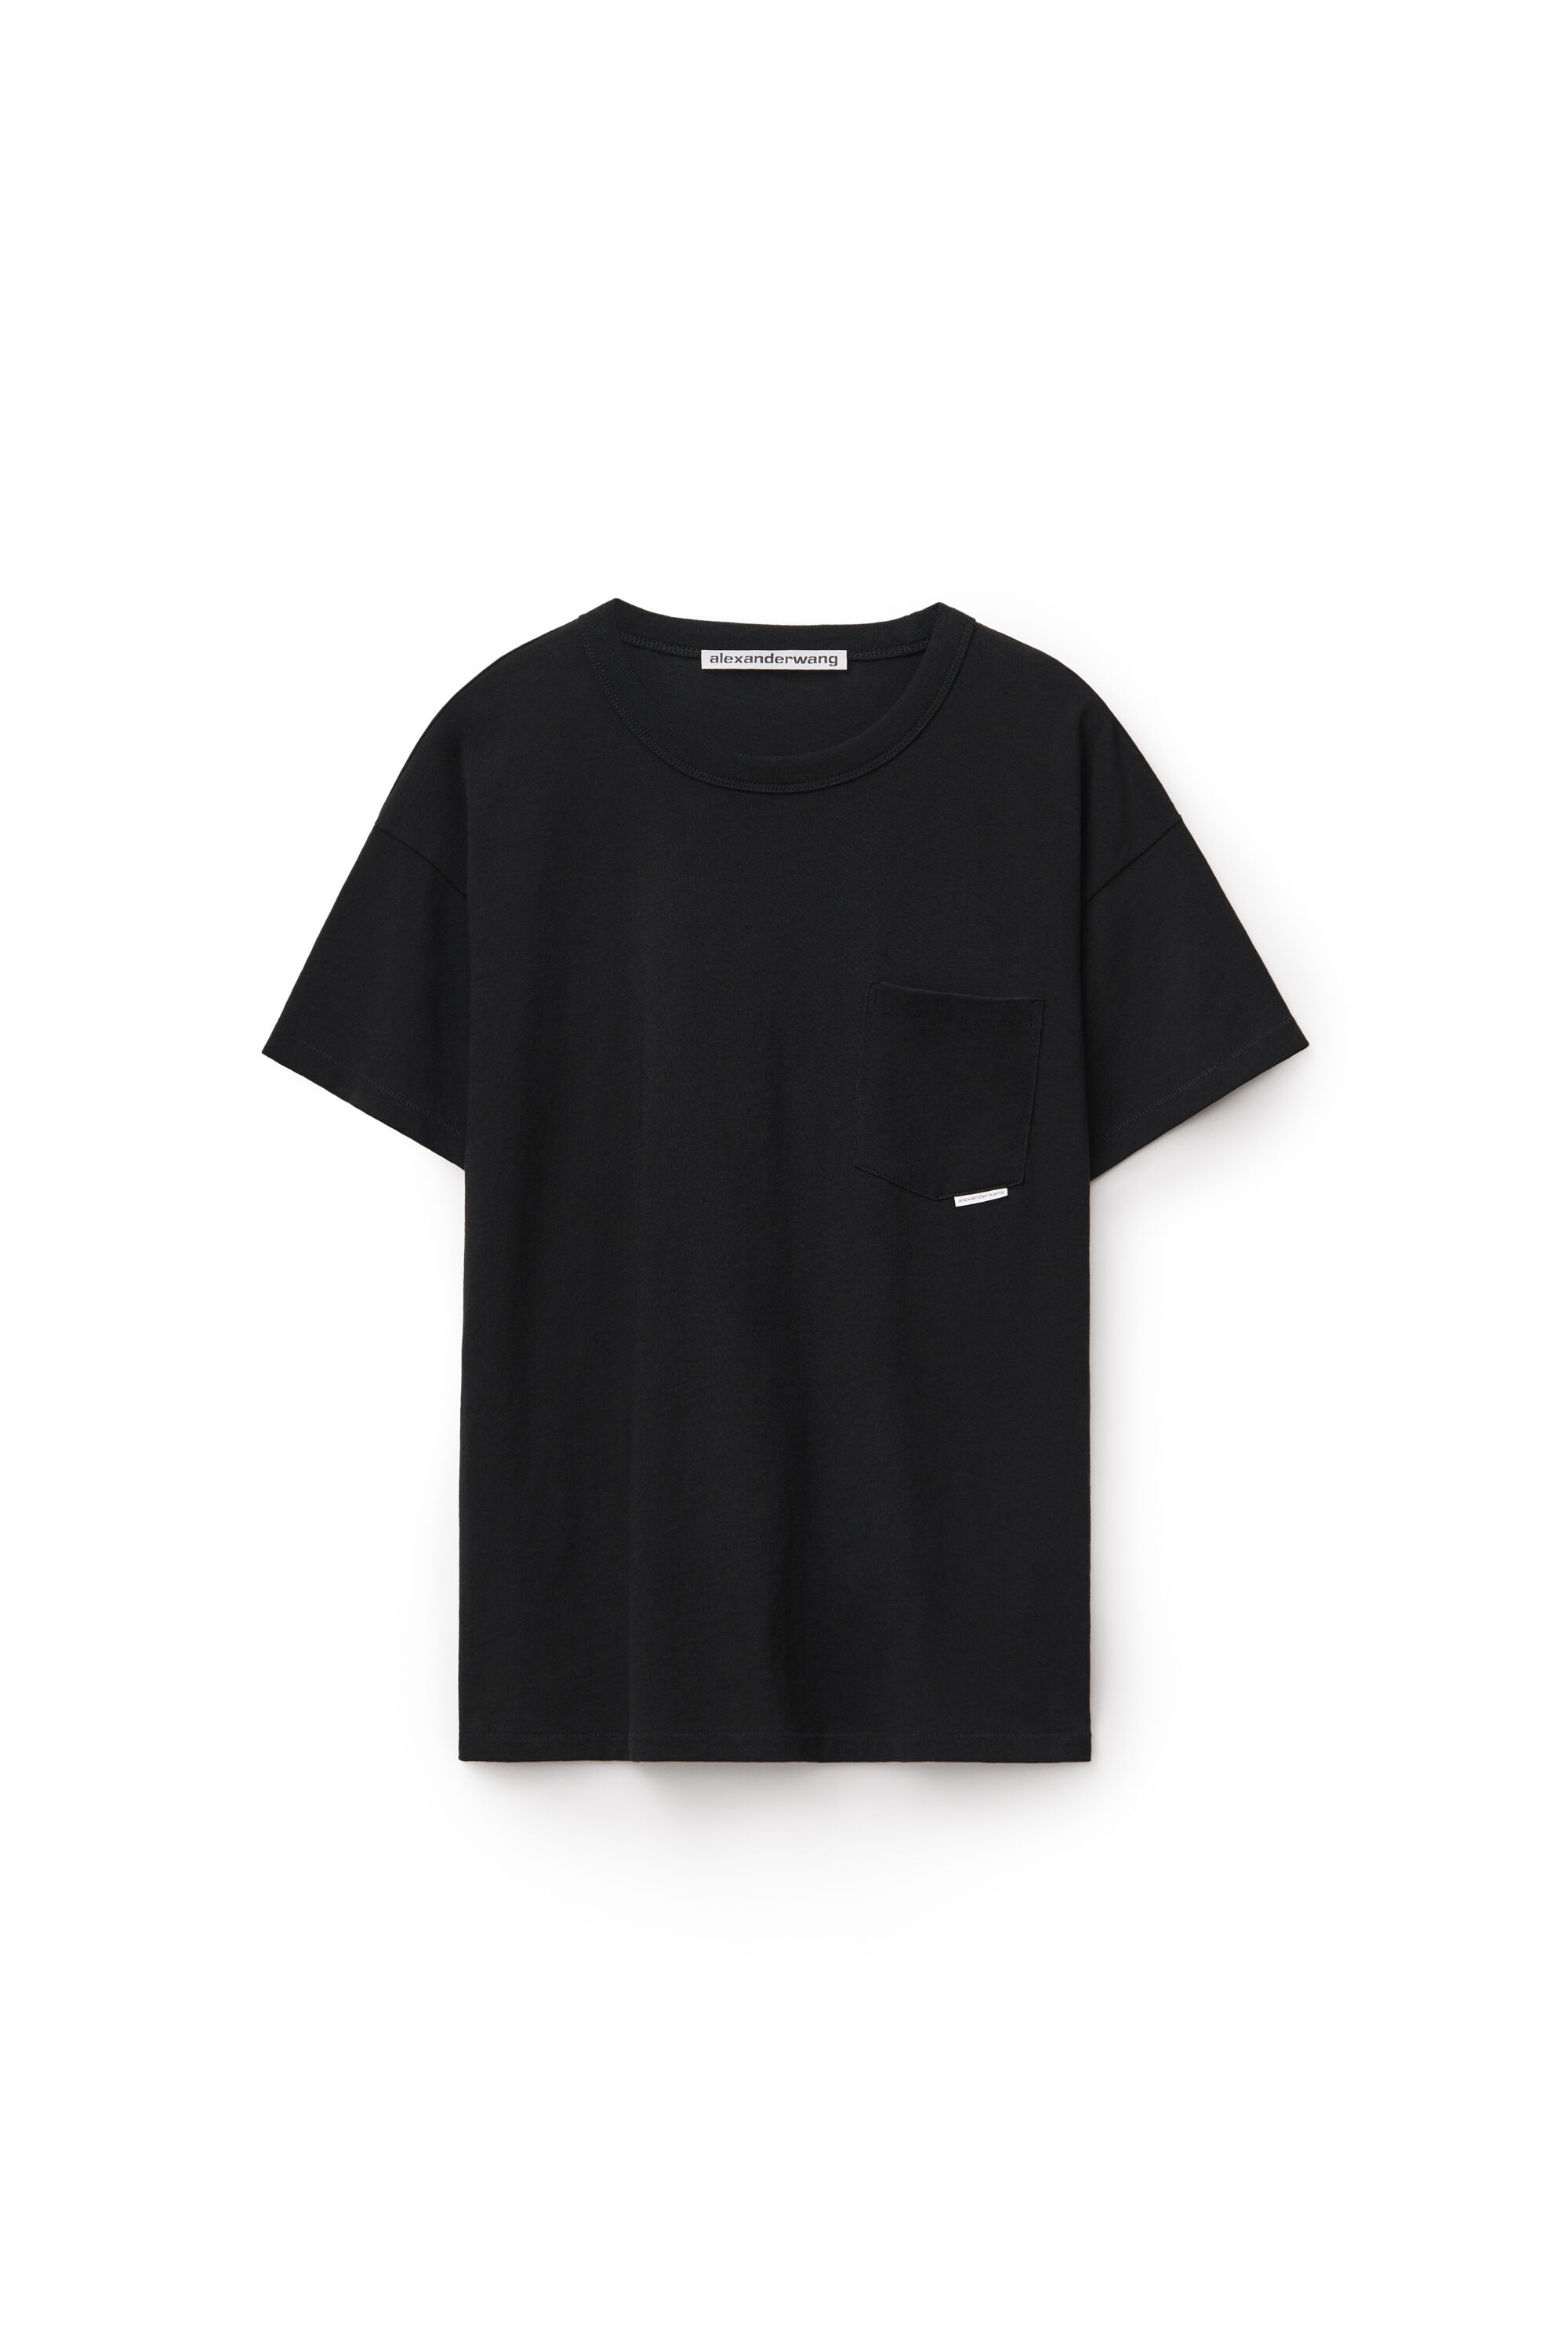 Unisex Clothing, Shoes & Accessories | alexanderwang® US Official Site